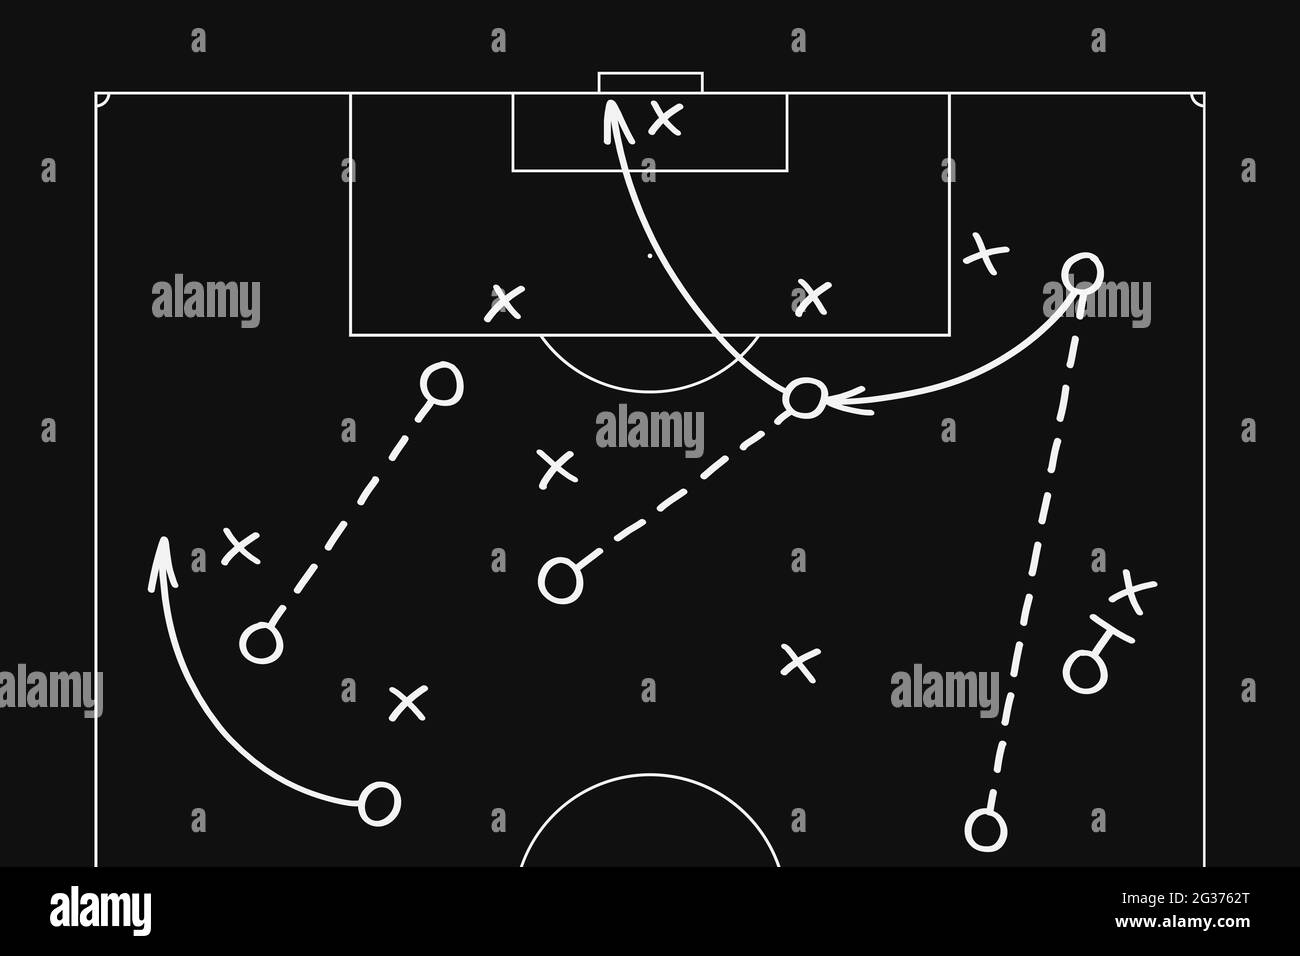 Football soccer game playbook, tactics and strategy diagram drawn with white marker on blackboard. Stock Photo